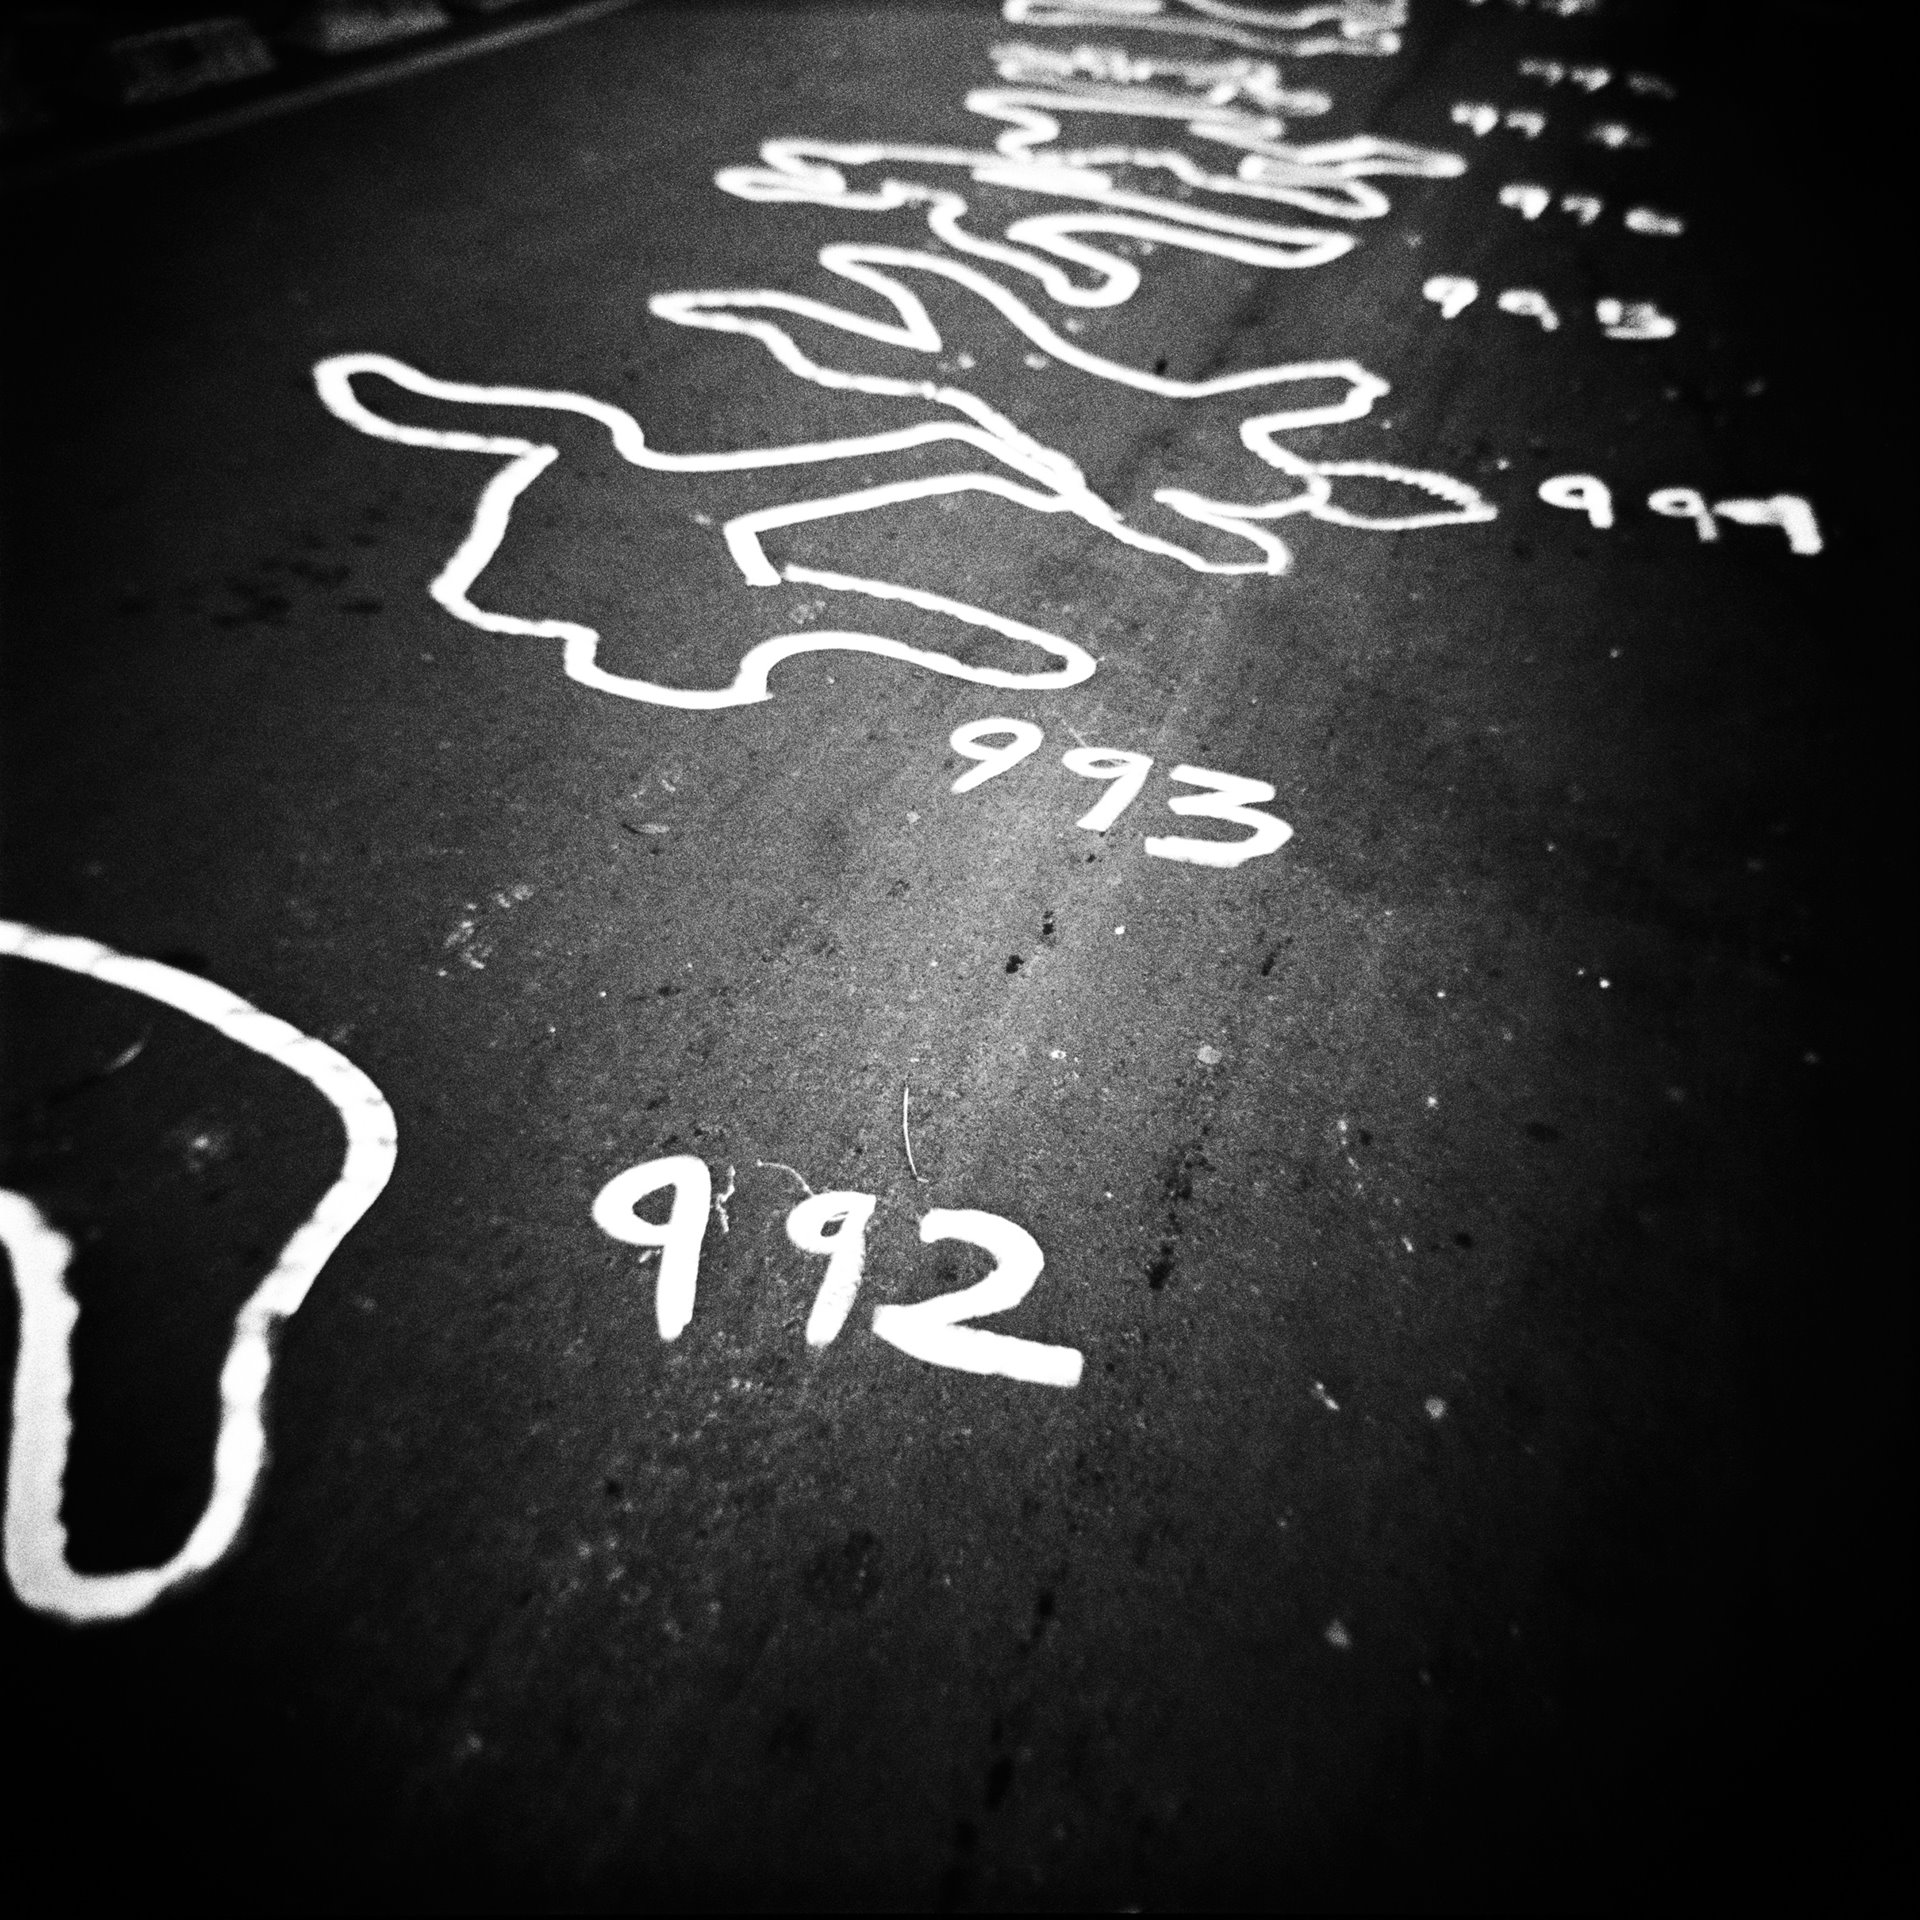 Silhouettes of bodies lie drawn on the streets of Bogotá in protest against the so-called &lsquo;false positives&rsquo; scandal, in which security forces, in order to receive promotion or other benefits, lured vulnerable people to remote areas with the offer of work, killed them, and passed them off to authorities as guerrillas, to boost combat kill rates. According to a UN special rapporteur on extrajudicial executions, examples of such killings date back to the 1980s, although nearly 80 percent of them took place between 2000 and 2008. The Special Jurisdiction for Peace (JEP) records that 6,402 people were killed in this manner between 2002 and 2008 alone.